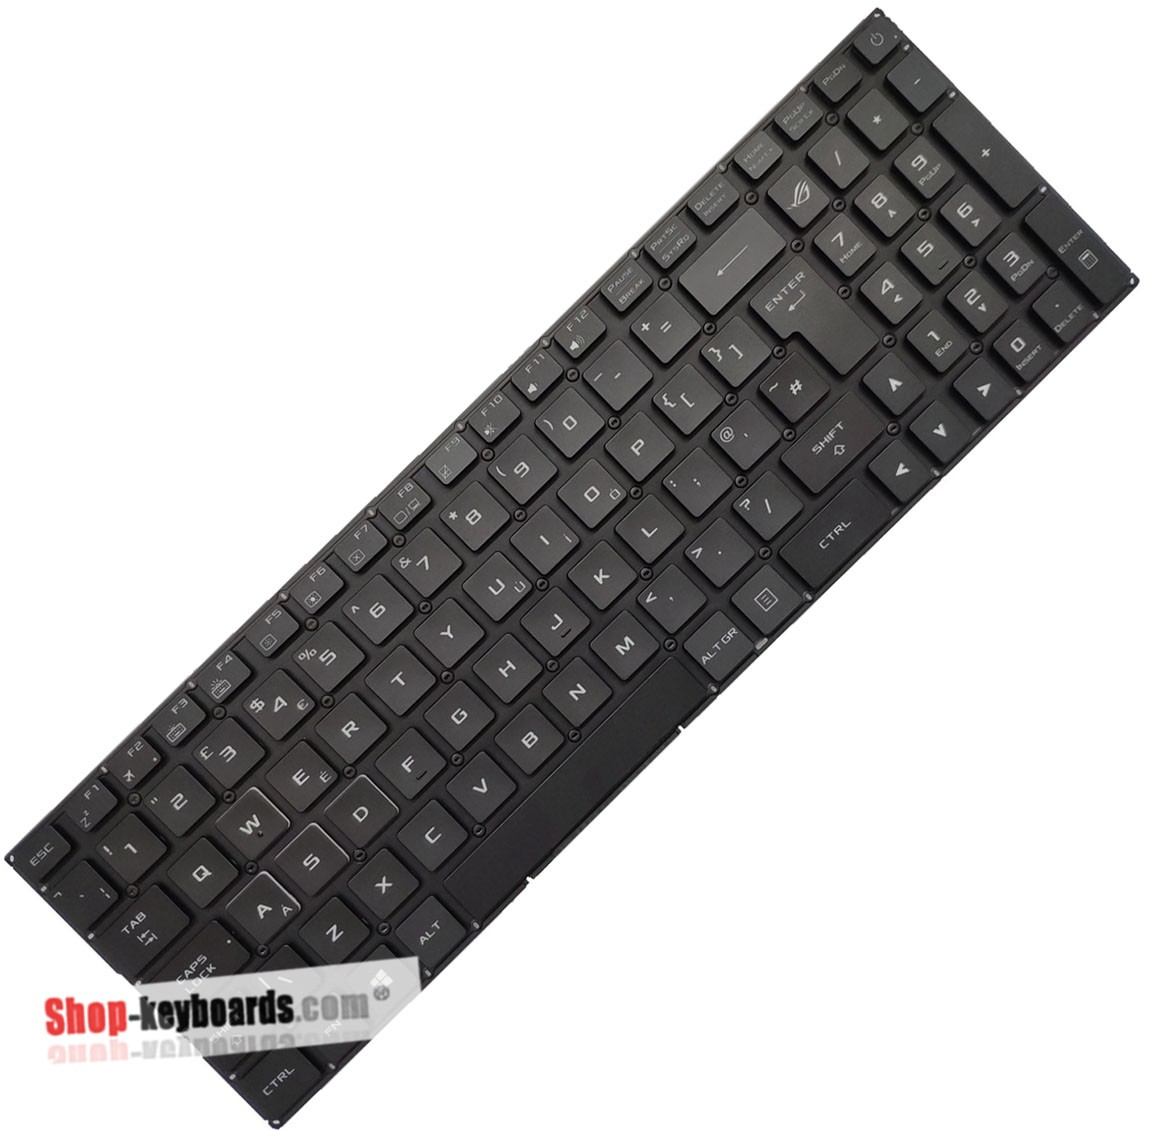 Asus 0KNB0-6618FR00 Keyboard replacement